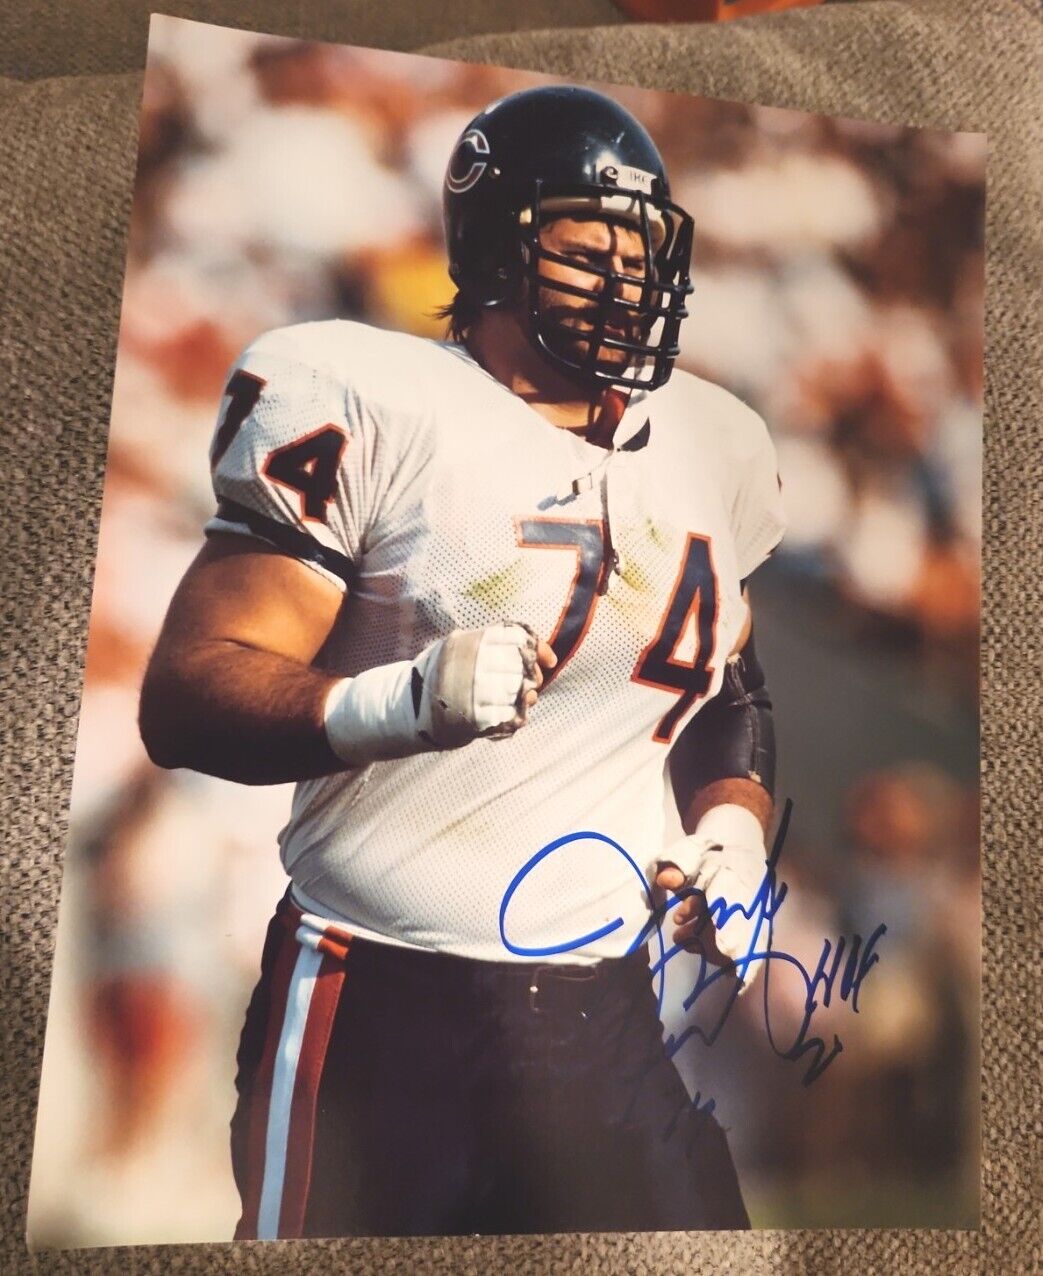 JIM COVERT SIGNED 8X10 PHOTO CHICAGO BEARS HOF 2020 INSCRIBED W/COA+PROOF WOW